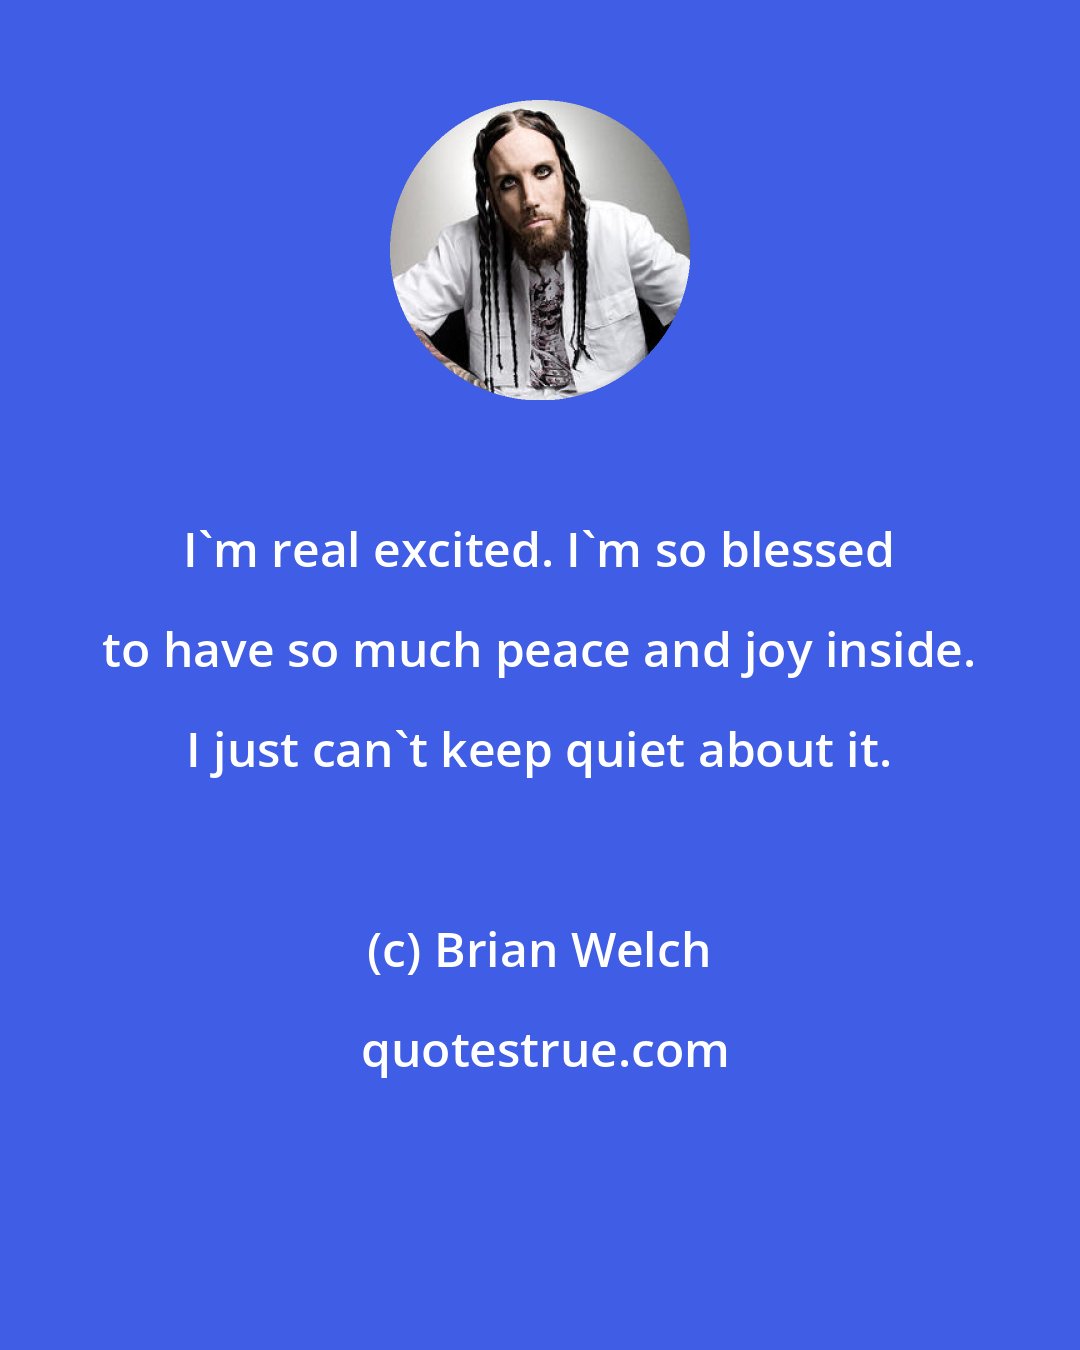 Brian Welch: I'm real excited. I'm so blessed to have so much peace and joy inside. I just can't keep quiet about it.